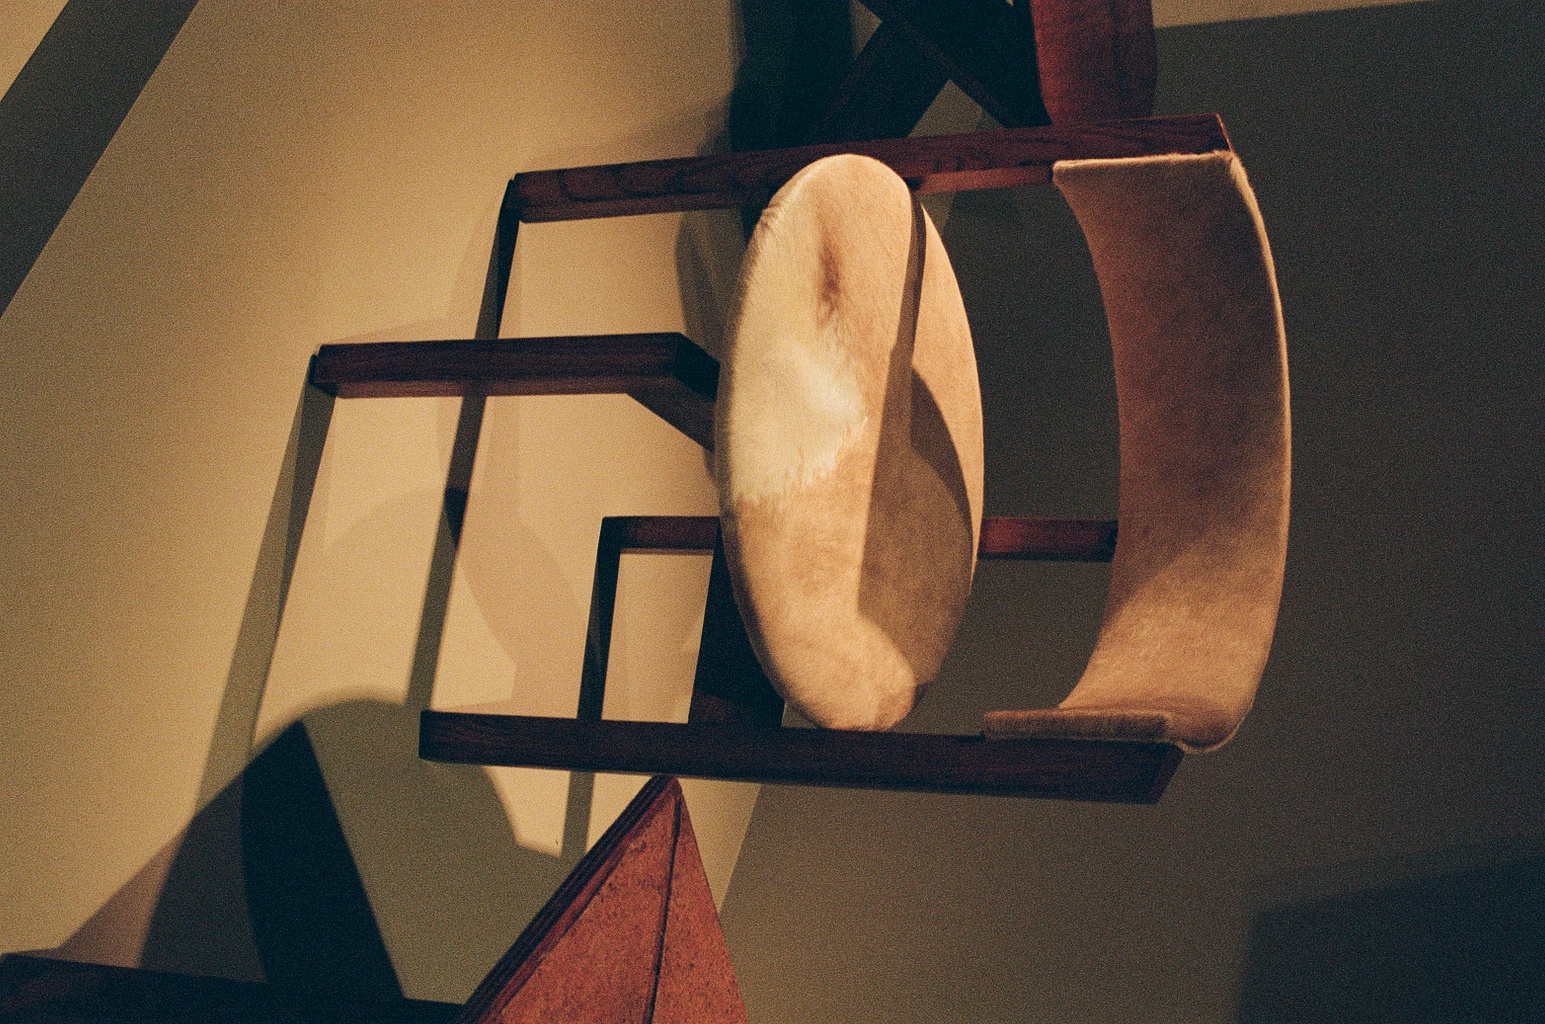 Hervé Baley, Single chair, c. 1963. Solid wood, plywood, and cowhide. 29 x 23 1/4 x 17 3/4 in.